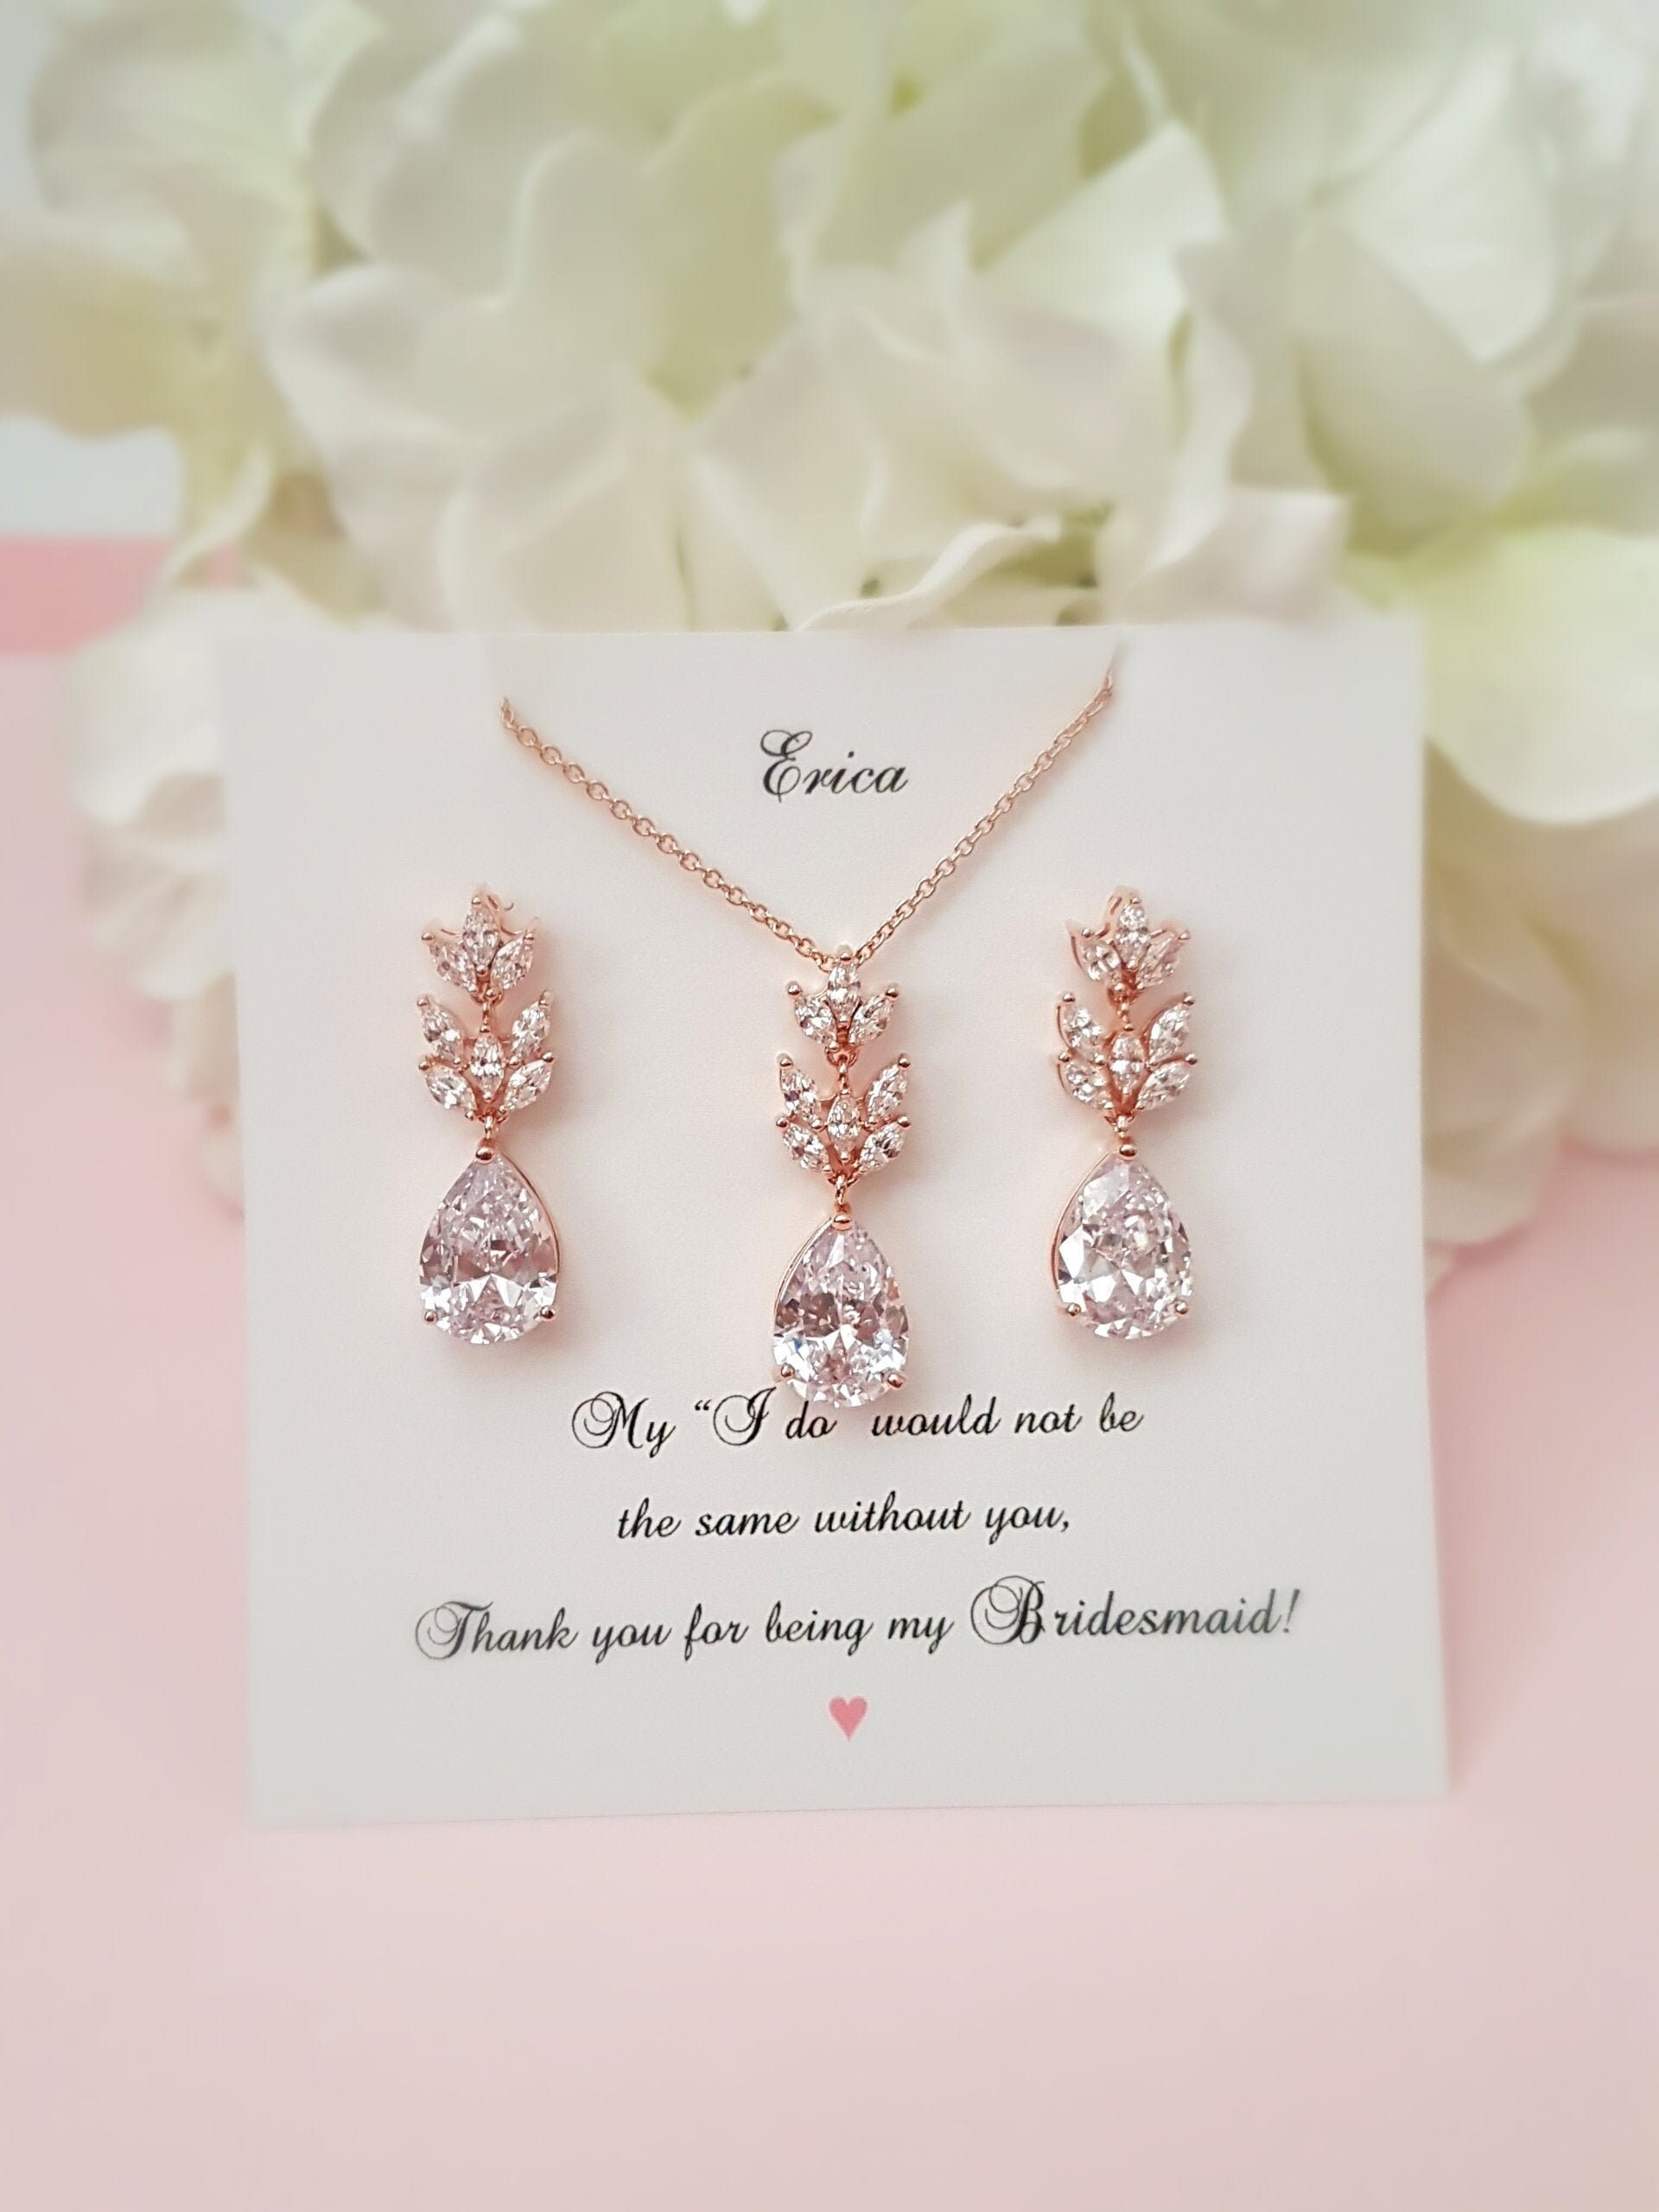 WEDDING JEWELRY SET Bridal Jewellery Crystals Necklace Earring Bracelet  Ring NEW £10.99 - PicClick UK